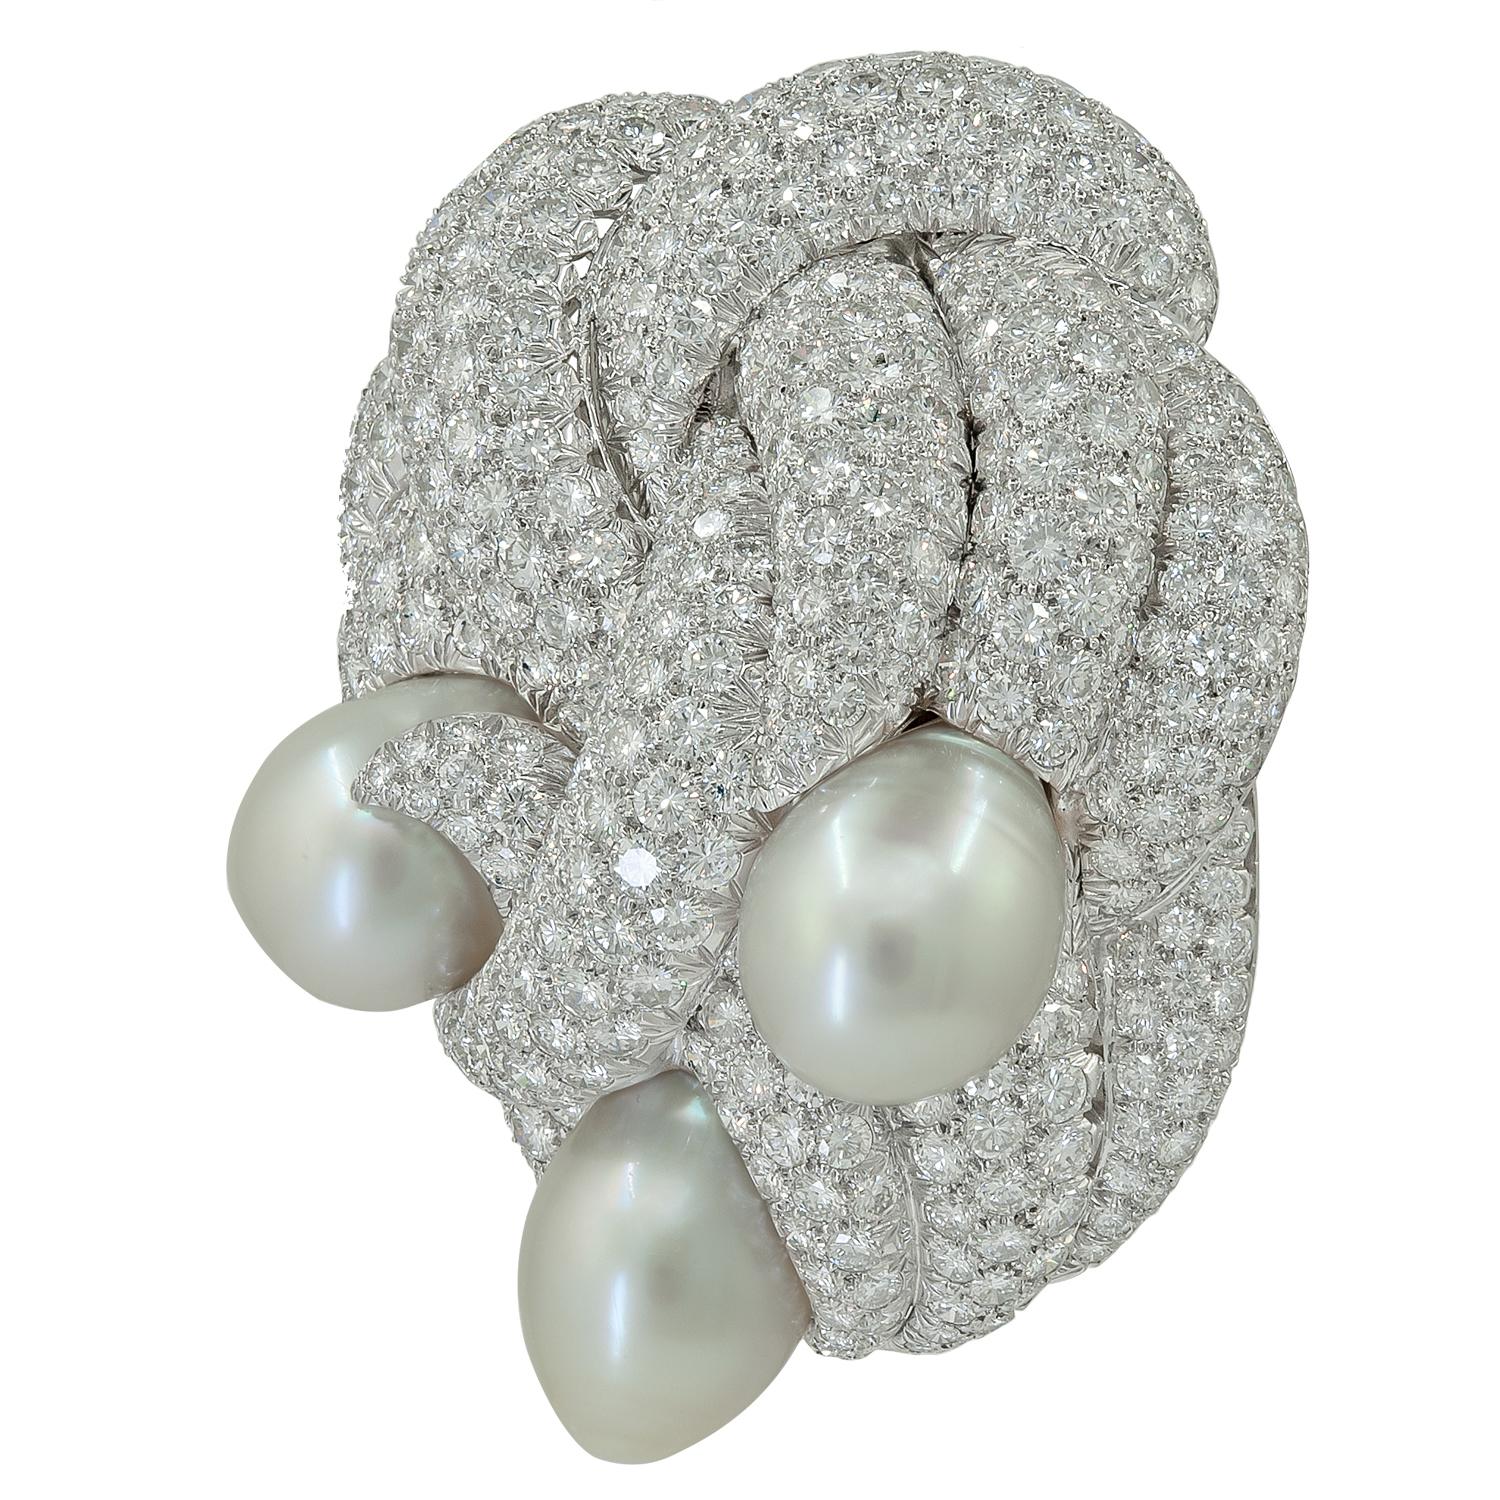 DAVID WEBB Diamond, Pearl Brooch
Platinum clip brooch, set with round brilliant-cut diamonds, and three cultured pearls.
Pearl dimensions approx. – 24.8 by 15.1 by 15.1 mm
22.1 by 15.4 by 15.4 mm
21.1 by 15.9 by 15.5 mm
Total diamond weight approx.